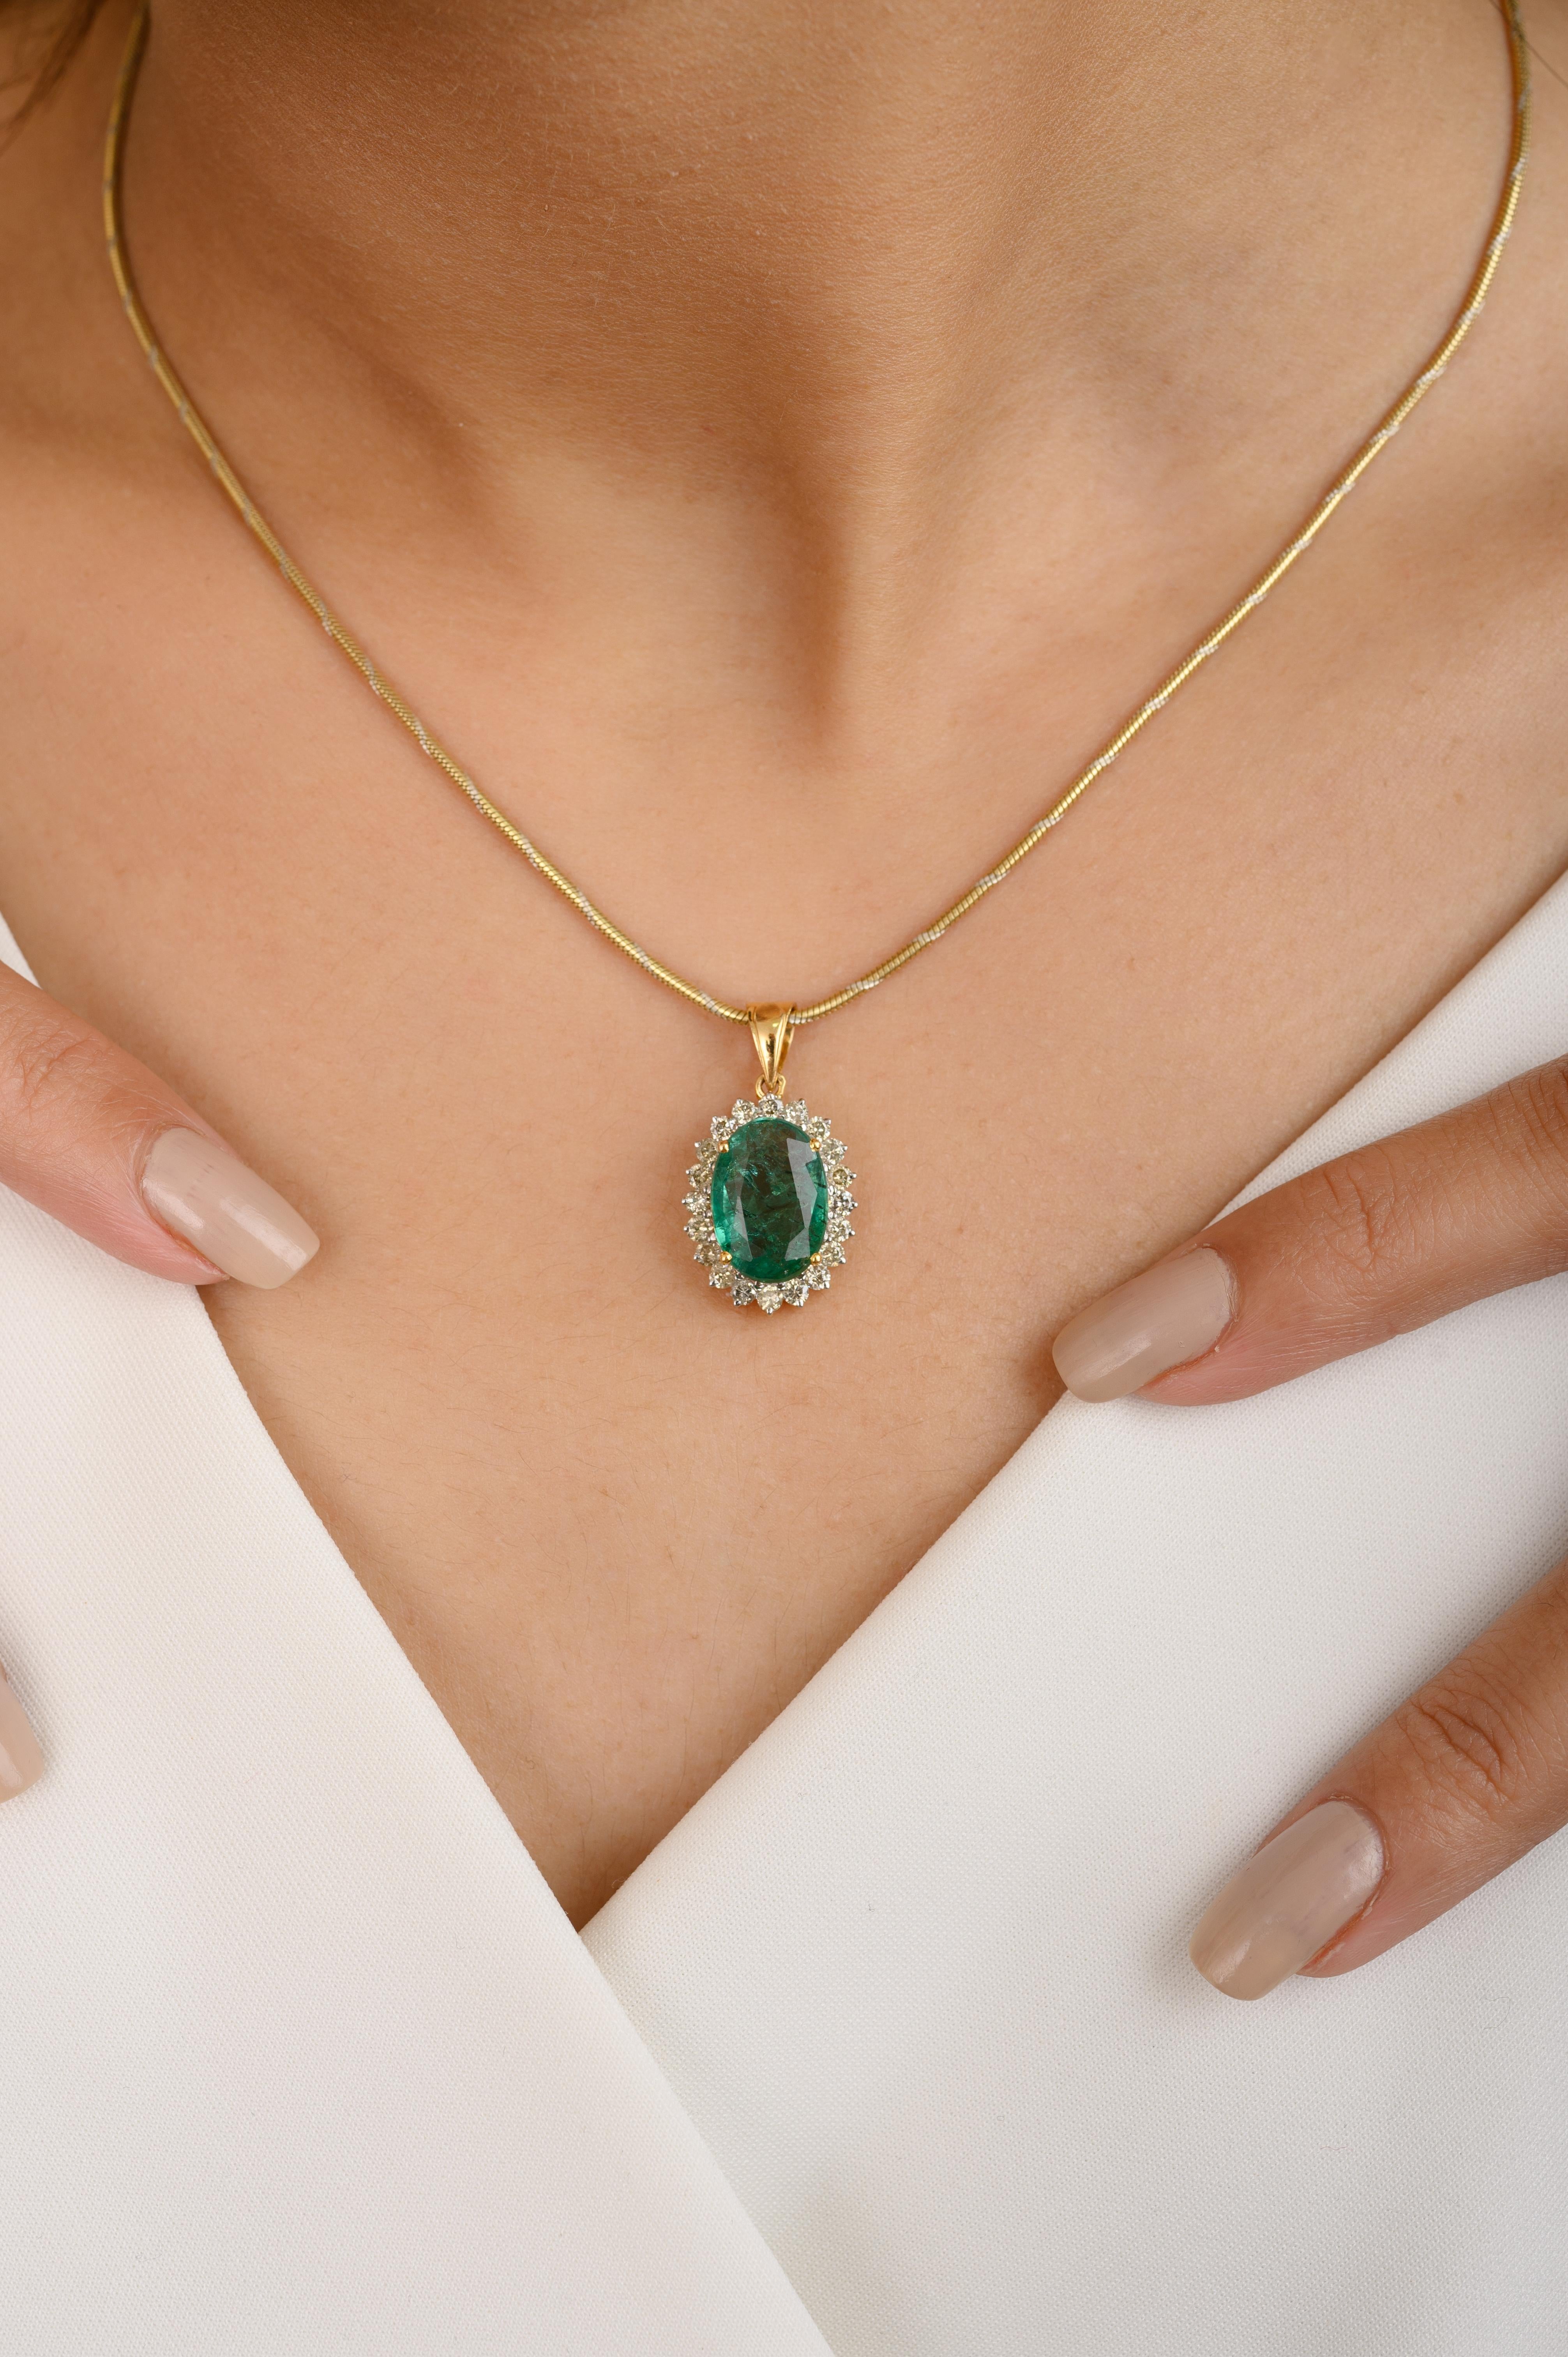 Oval Cut 4.2 Carat Oval Emerald Diamond Halo Pendant for Gift in 14k Solid Yellow Gold For Sale